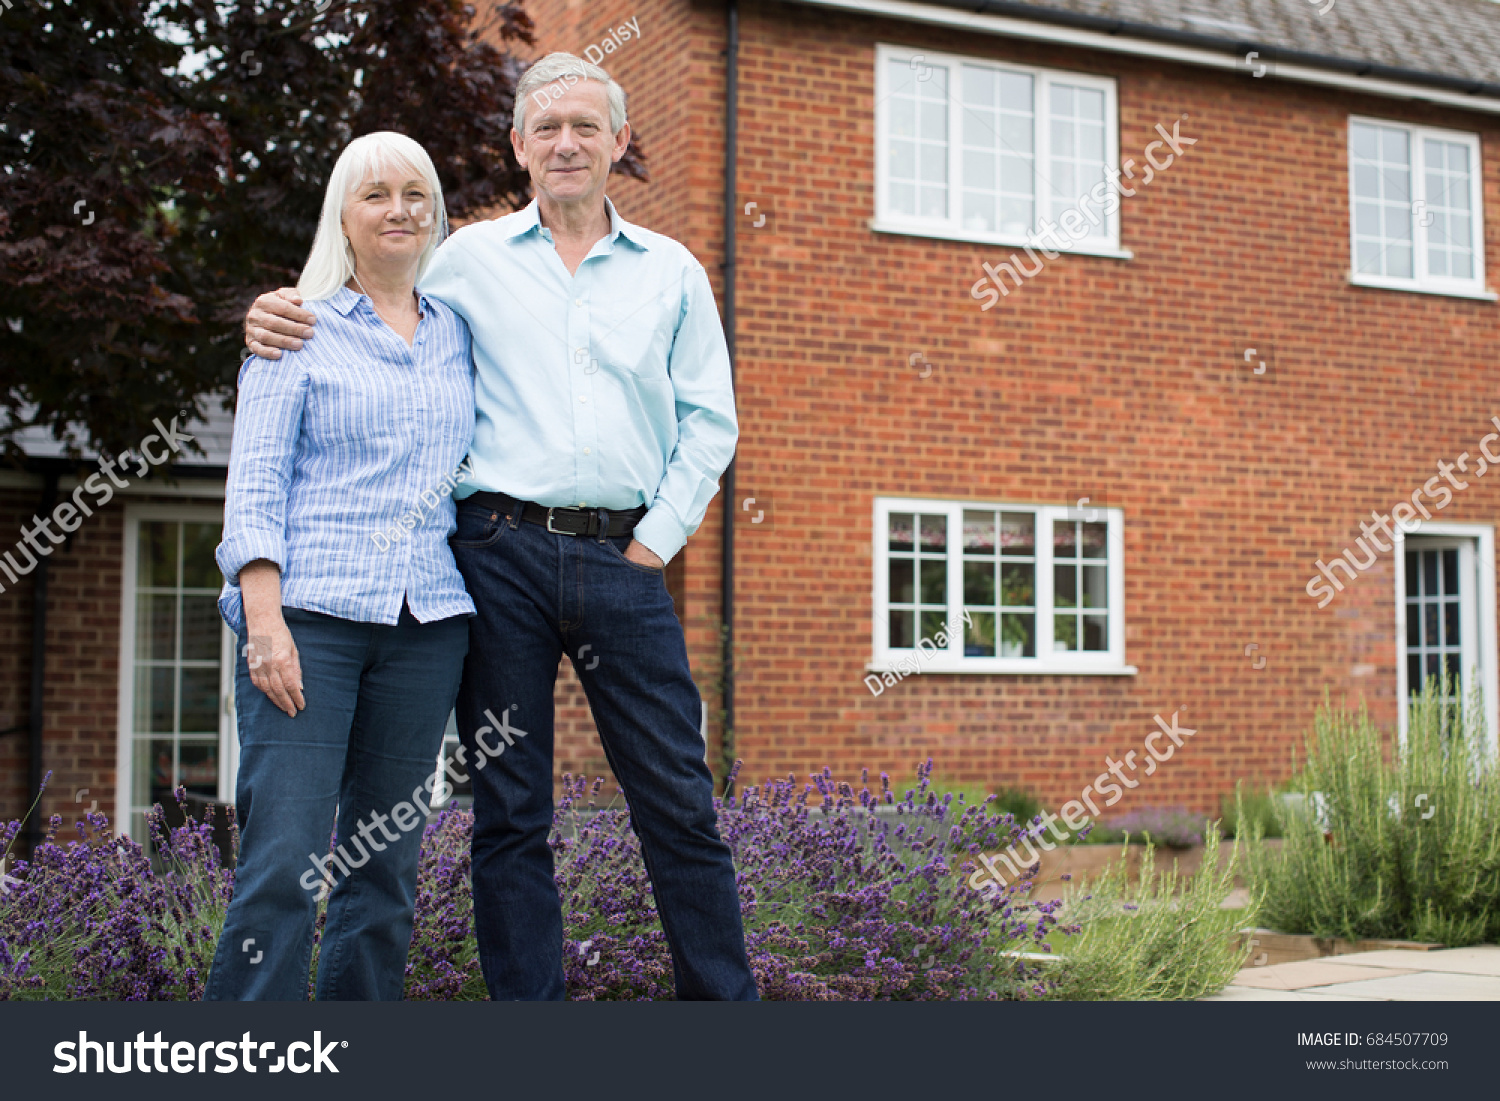 Portrait Of Retired Couple Standing Outside Home #684507709